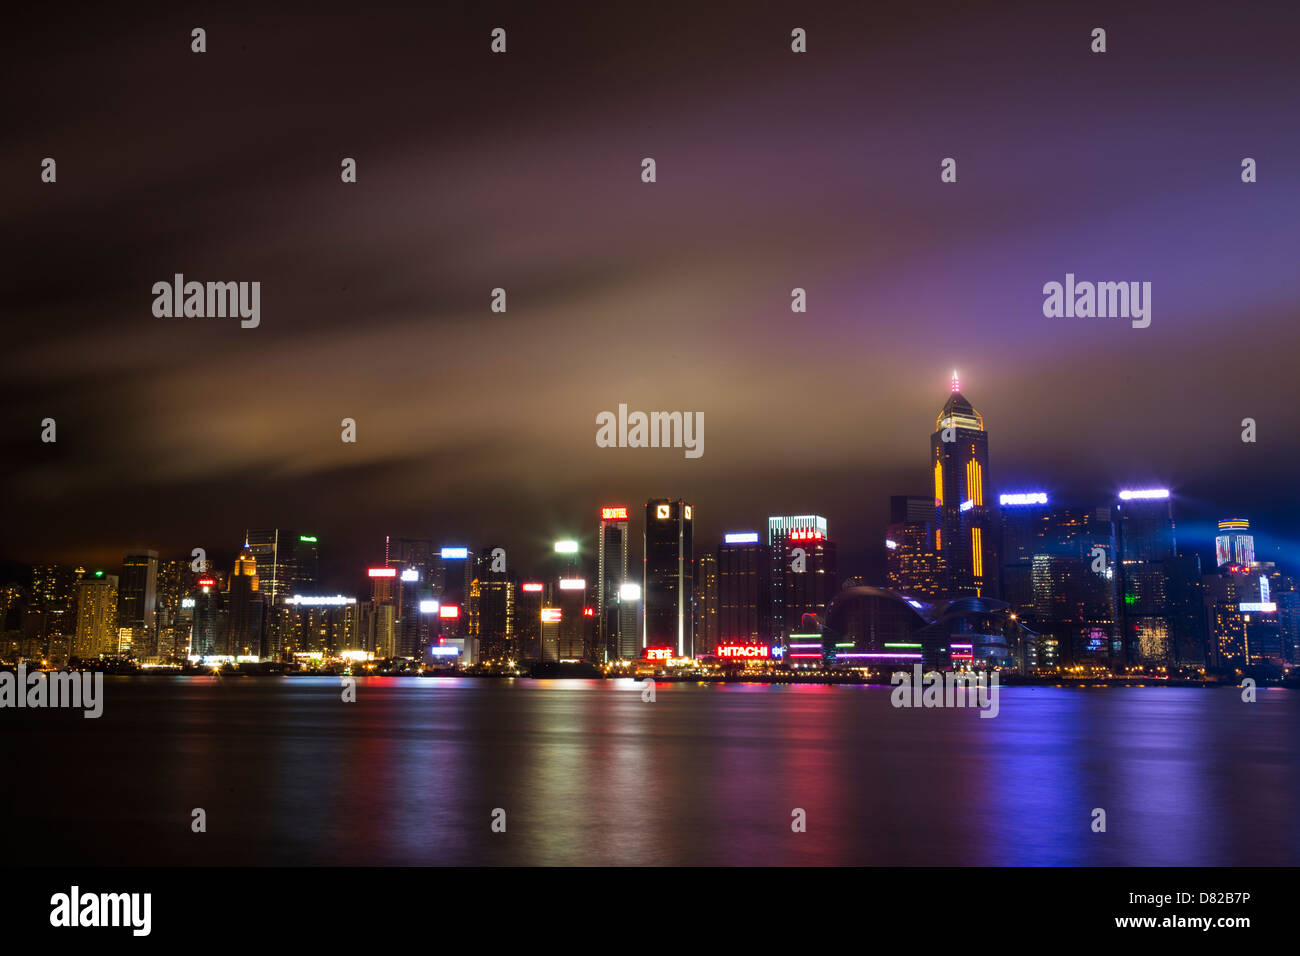 Hong Kong Skyline at night across the Victoria Harbour Stock Photo